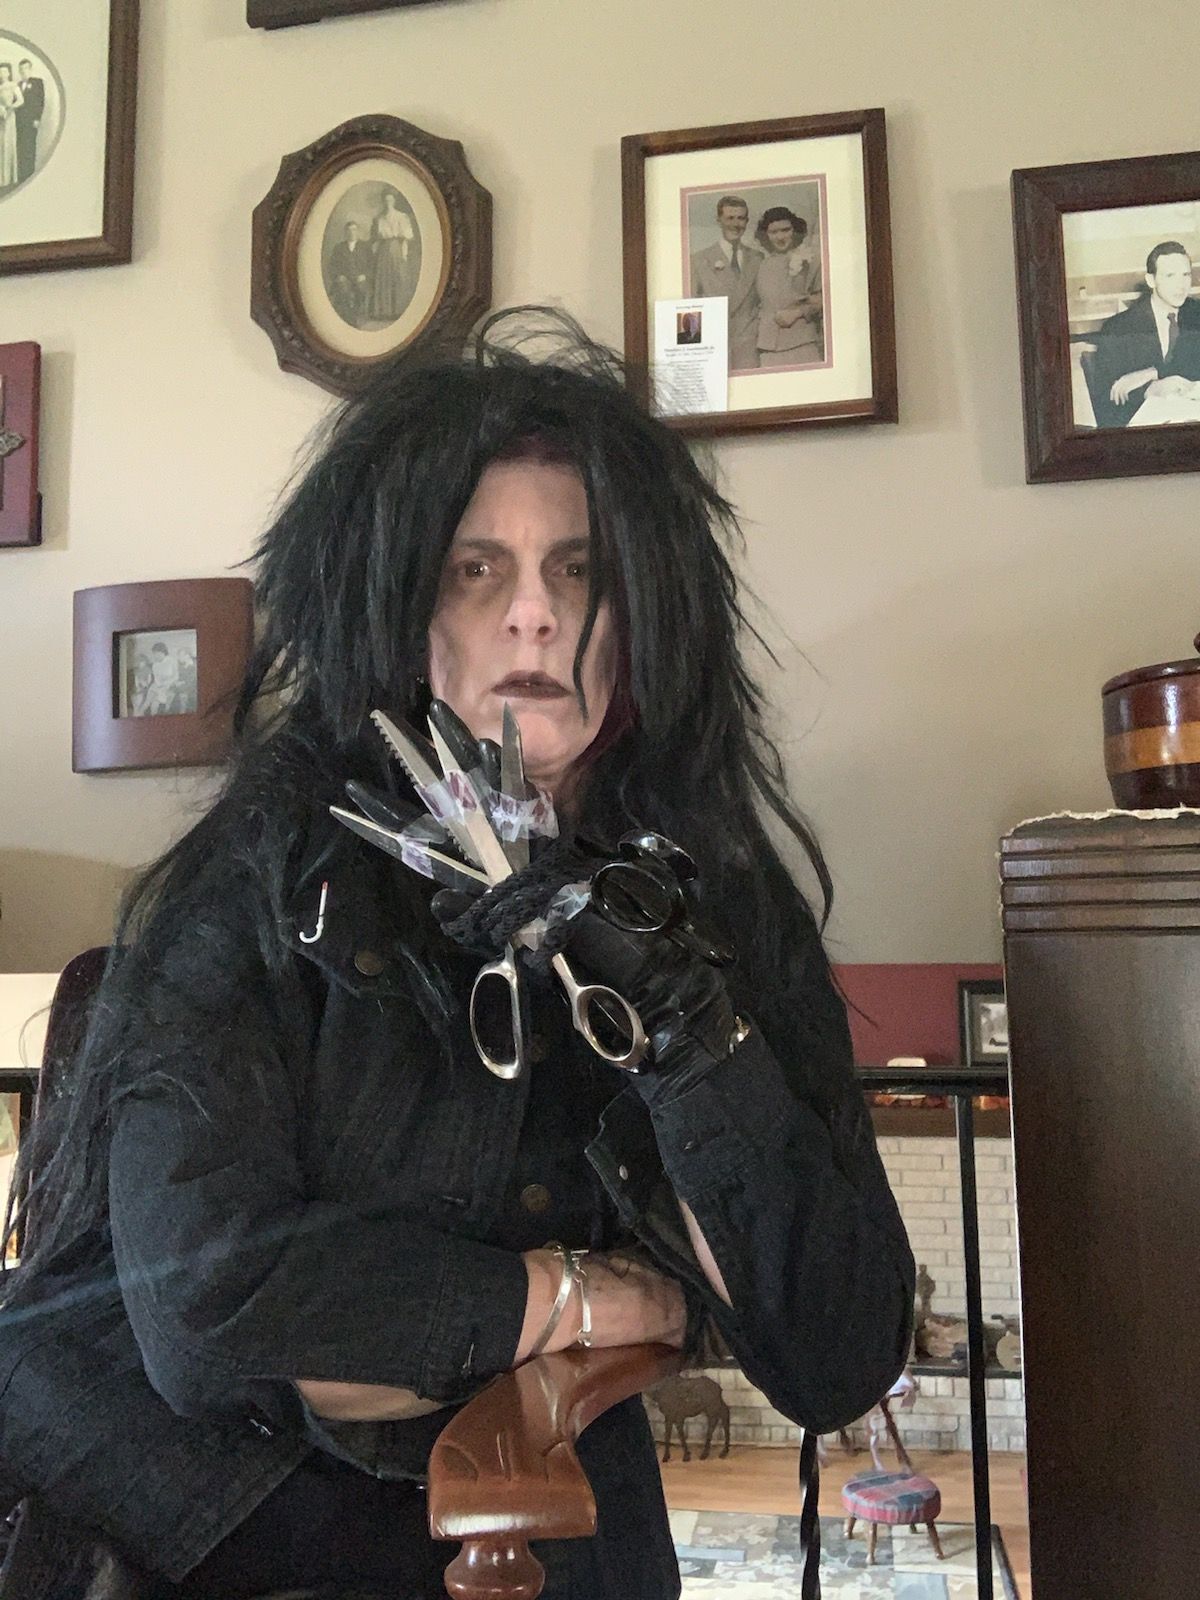 My mother has made all sorts of fun costumes to entertain herself during Quarantine. She went with Edward Scissorhands today!